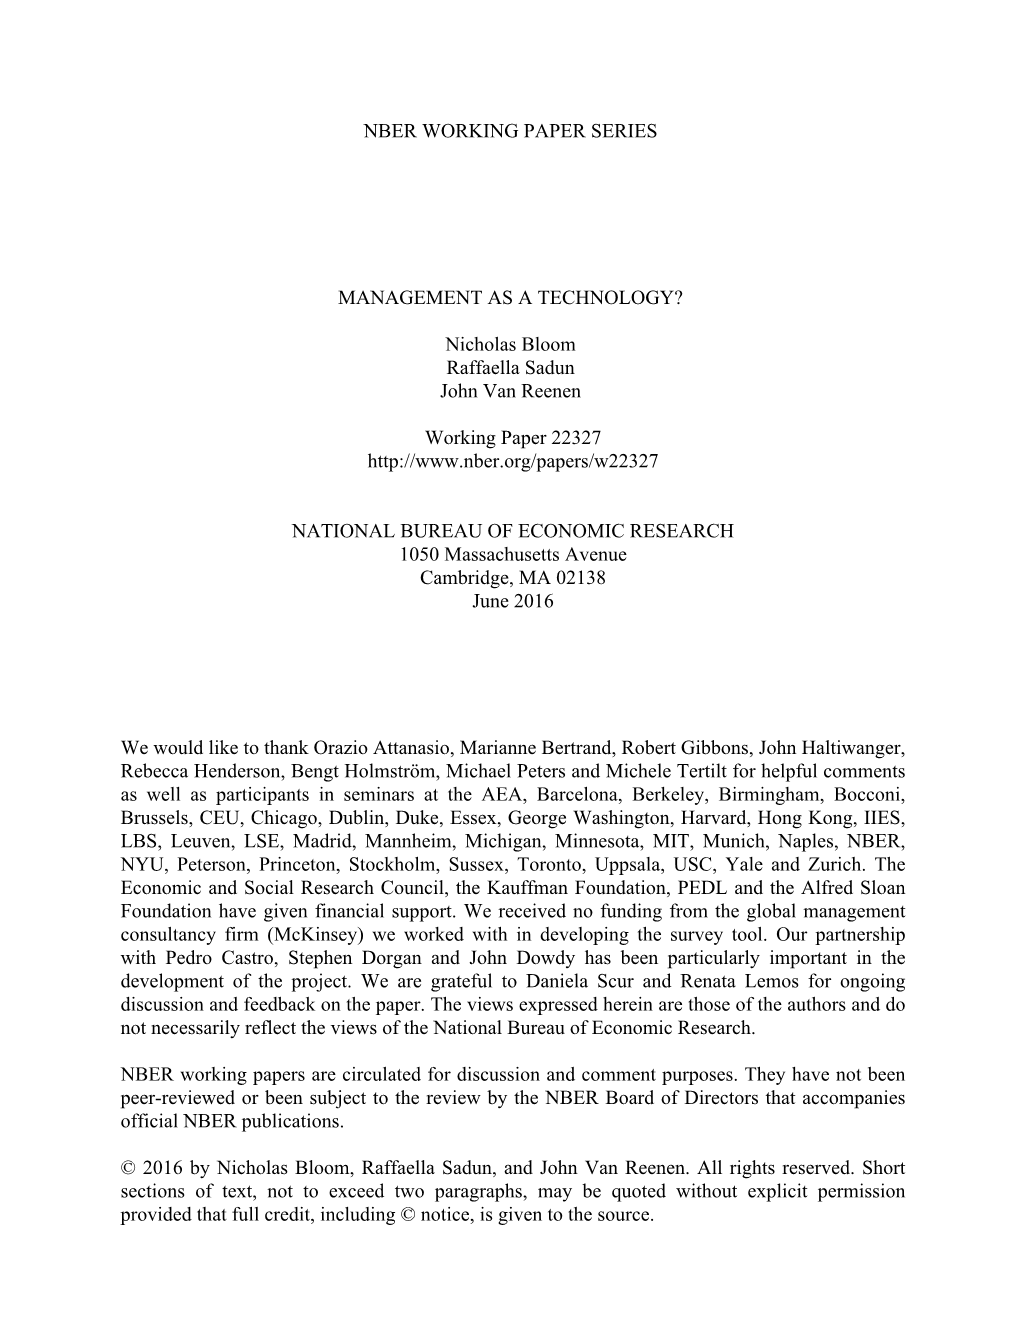 NBER WORKING PAPER SERIES MANAGEMENT AS a TECHNOLOGY? Nicholas Bloom